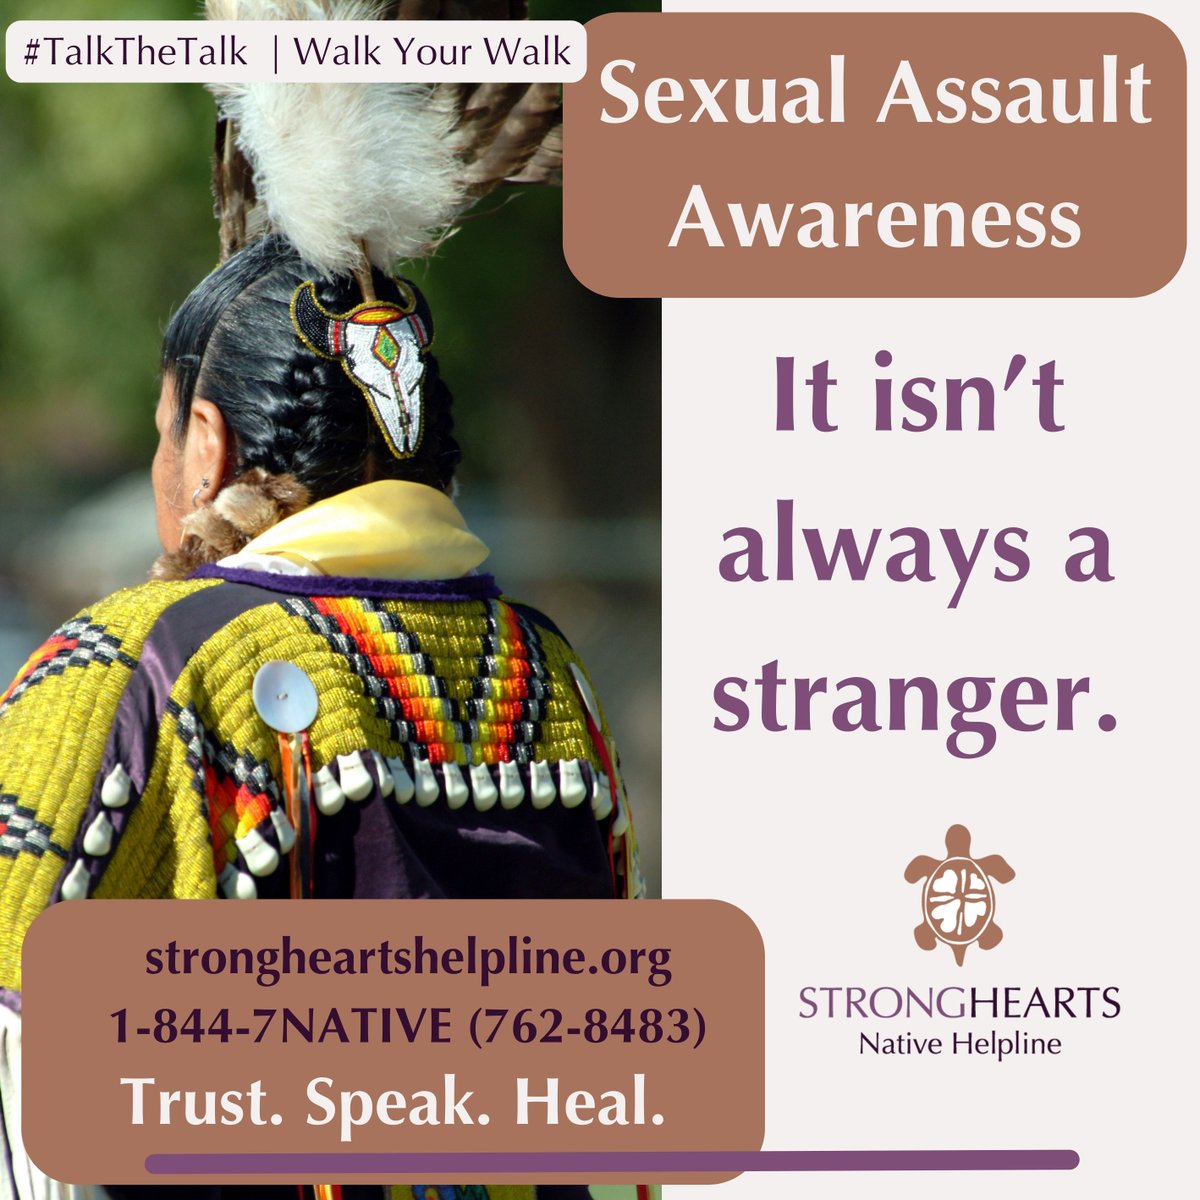 Perpetrators of sexual assault are not always strangers. If you are experiencing domestic or sexual violence Call/text 1-844-7NATIVE or chat with an advocate at strongheartshelpline.org 24/7 #TalkTheTalk you choose how to #WalkYourWalk